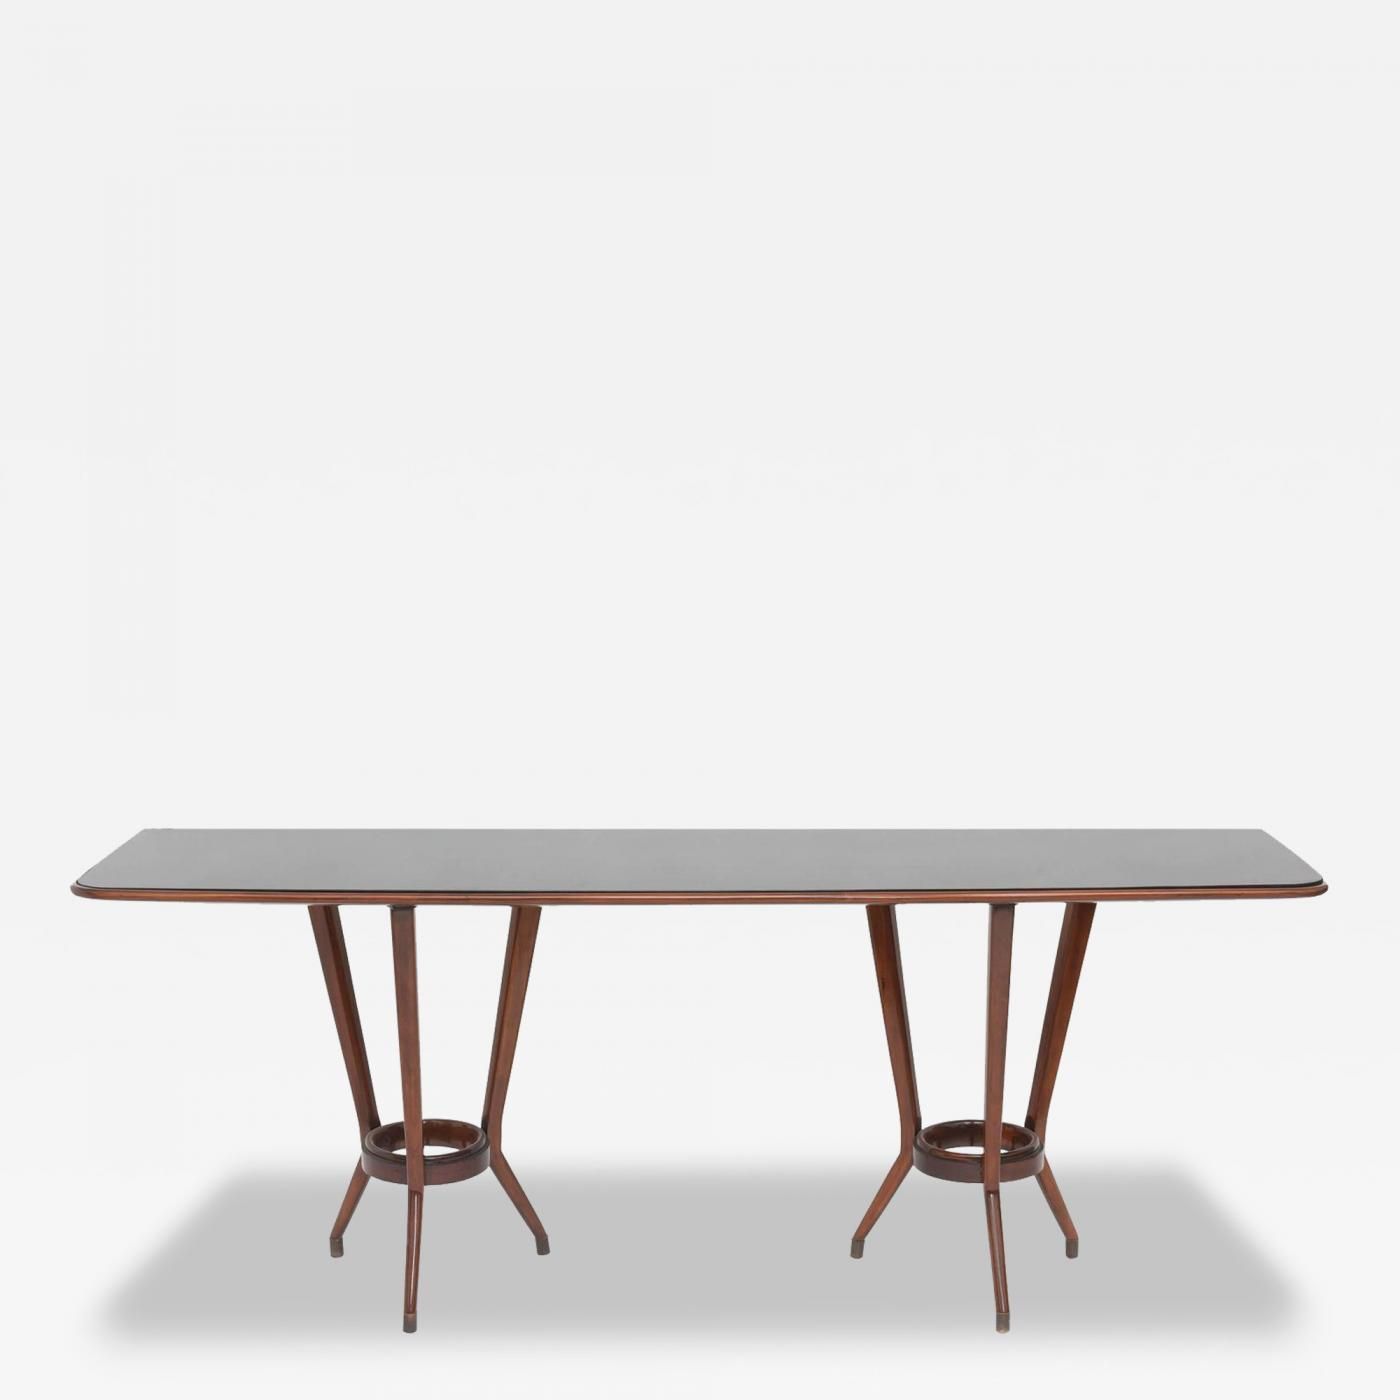 Guglielmo Ulrich; Mahogany, Brass And Black Glass Console Table For Phillip Brass Console Tables (View 9 of 30)